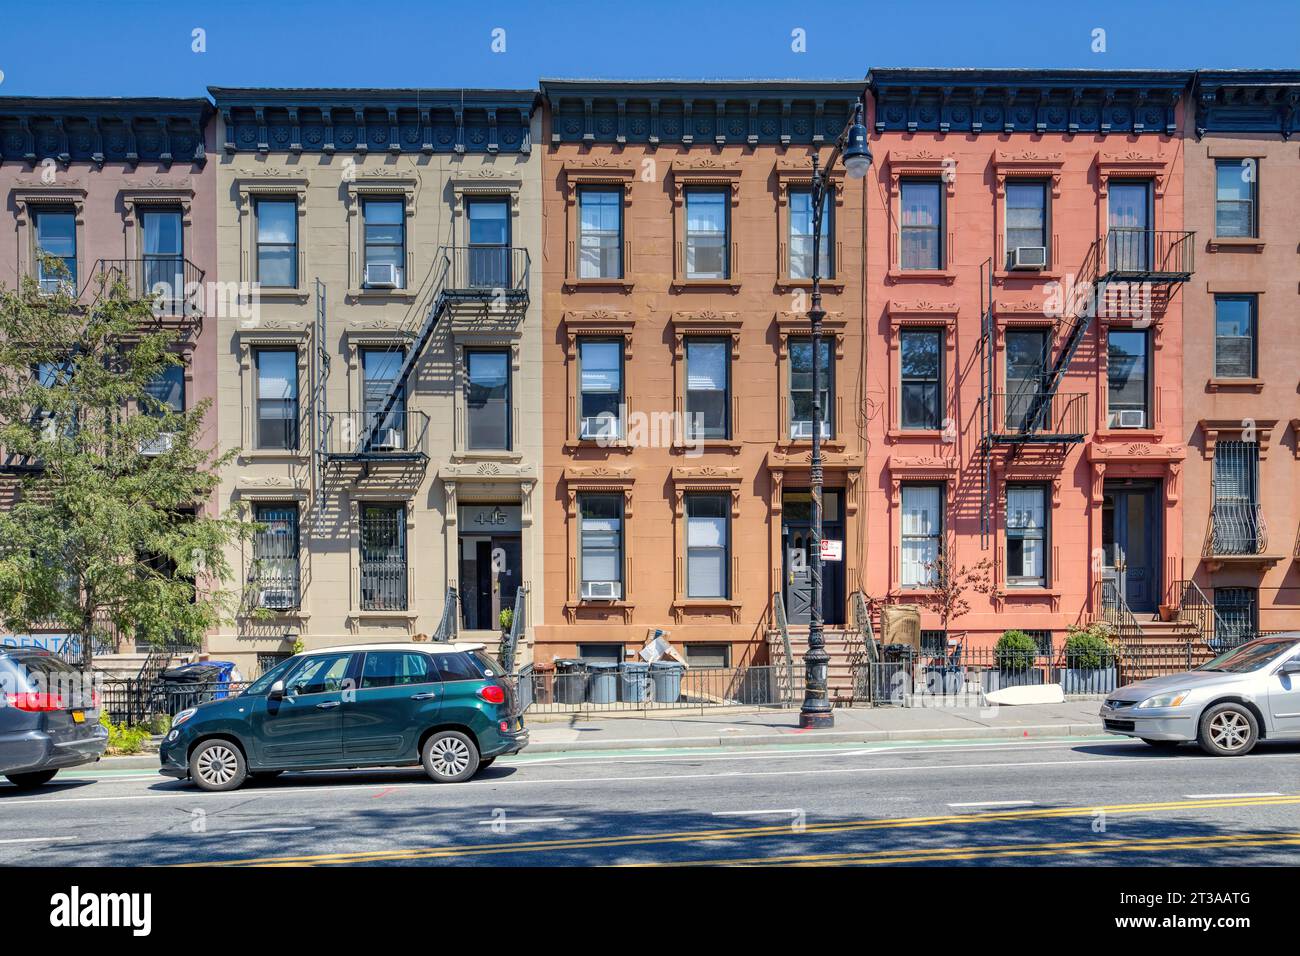 Park Slope, Brooklyn: Painted brownstone flats buildings, part of a set of six neo-Grec flats buildings built in 1881, now NYC designated landmarks. Stock Photo